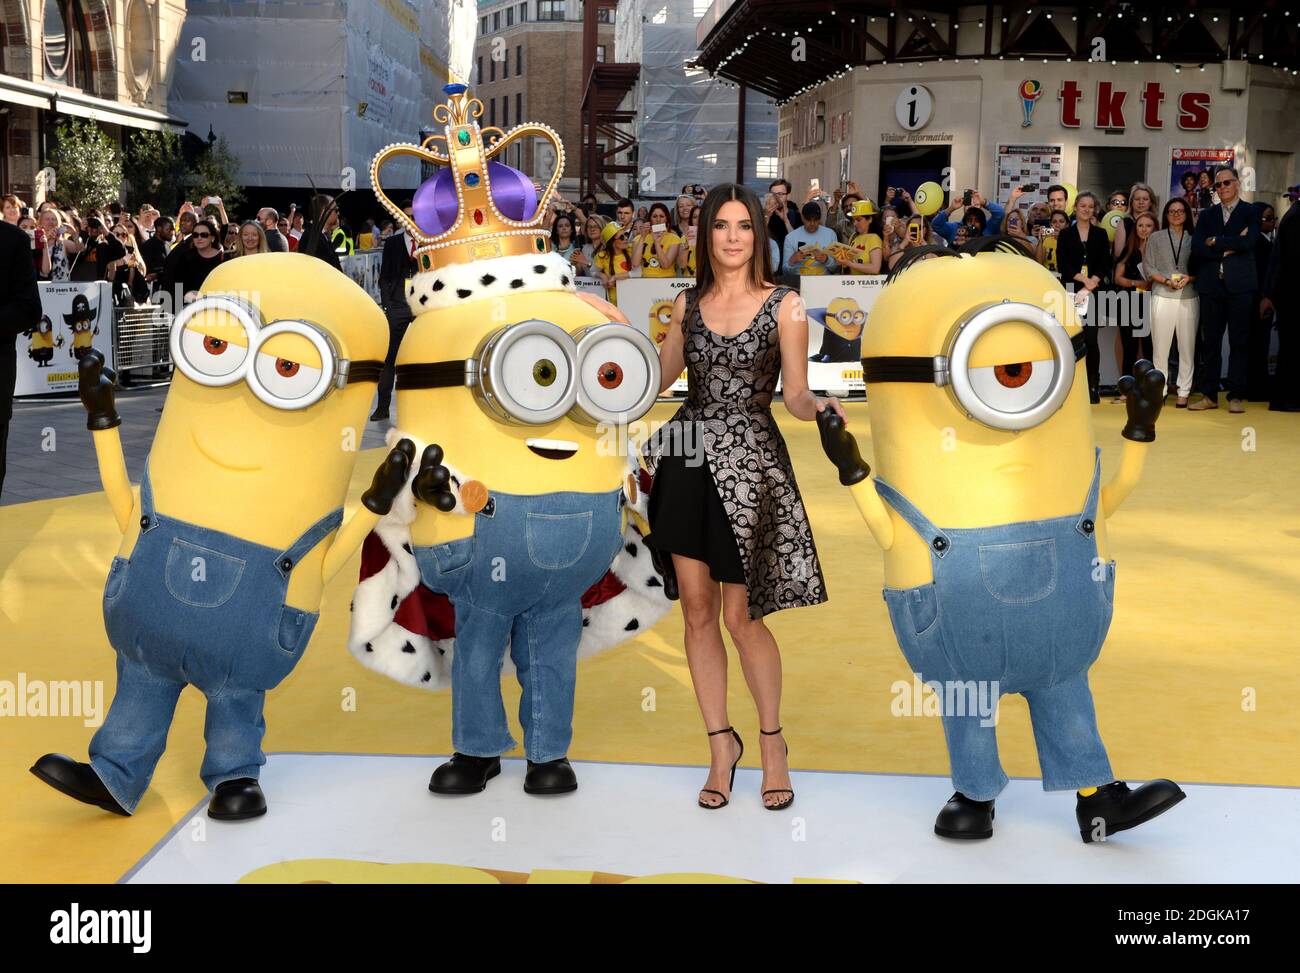 Sandra Bullock with Minions Bob, Kevin and Stuart attending the Minions UK Film Premiere held at the Odeon cinema Leicester Square, London  (Mandatory Credit: DOUG PETERS/ EMPICS Entertainment) Stock Photo